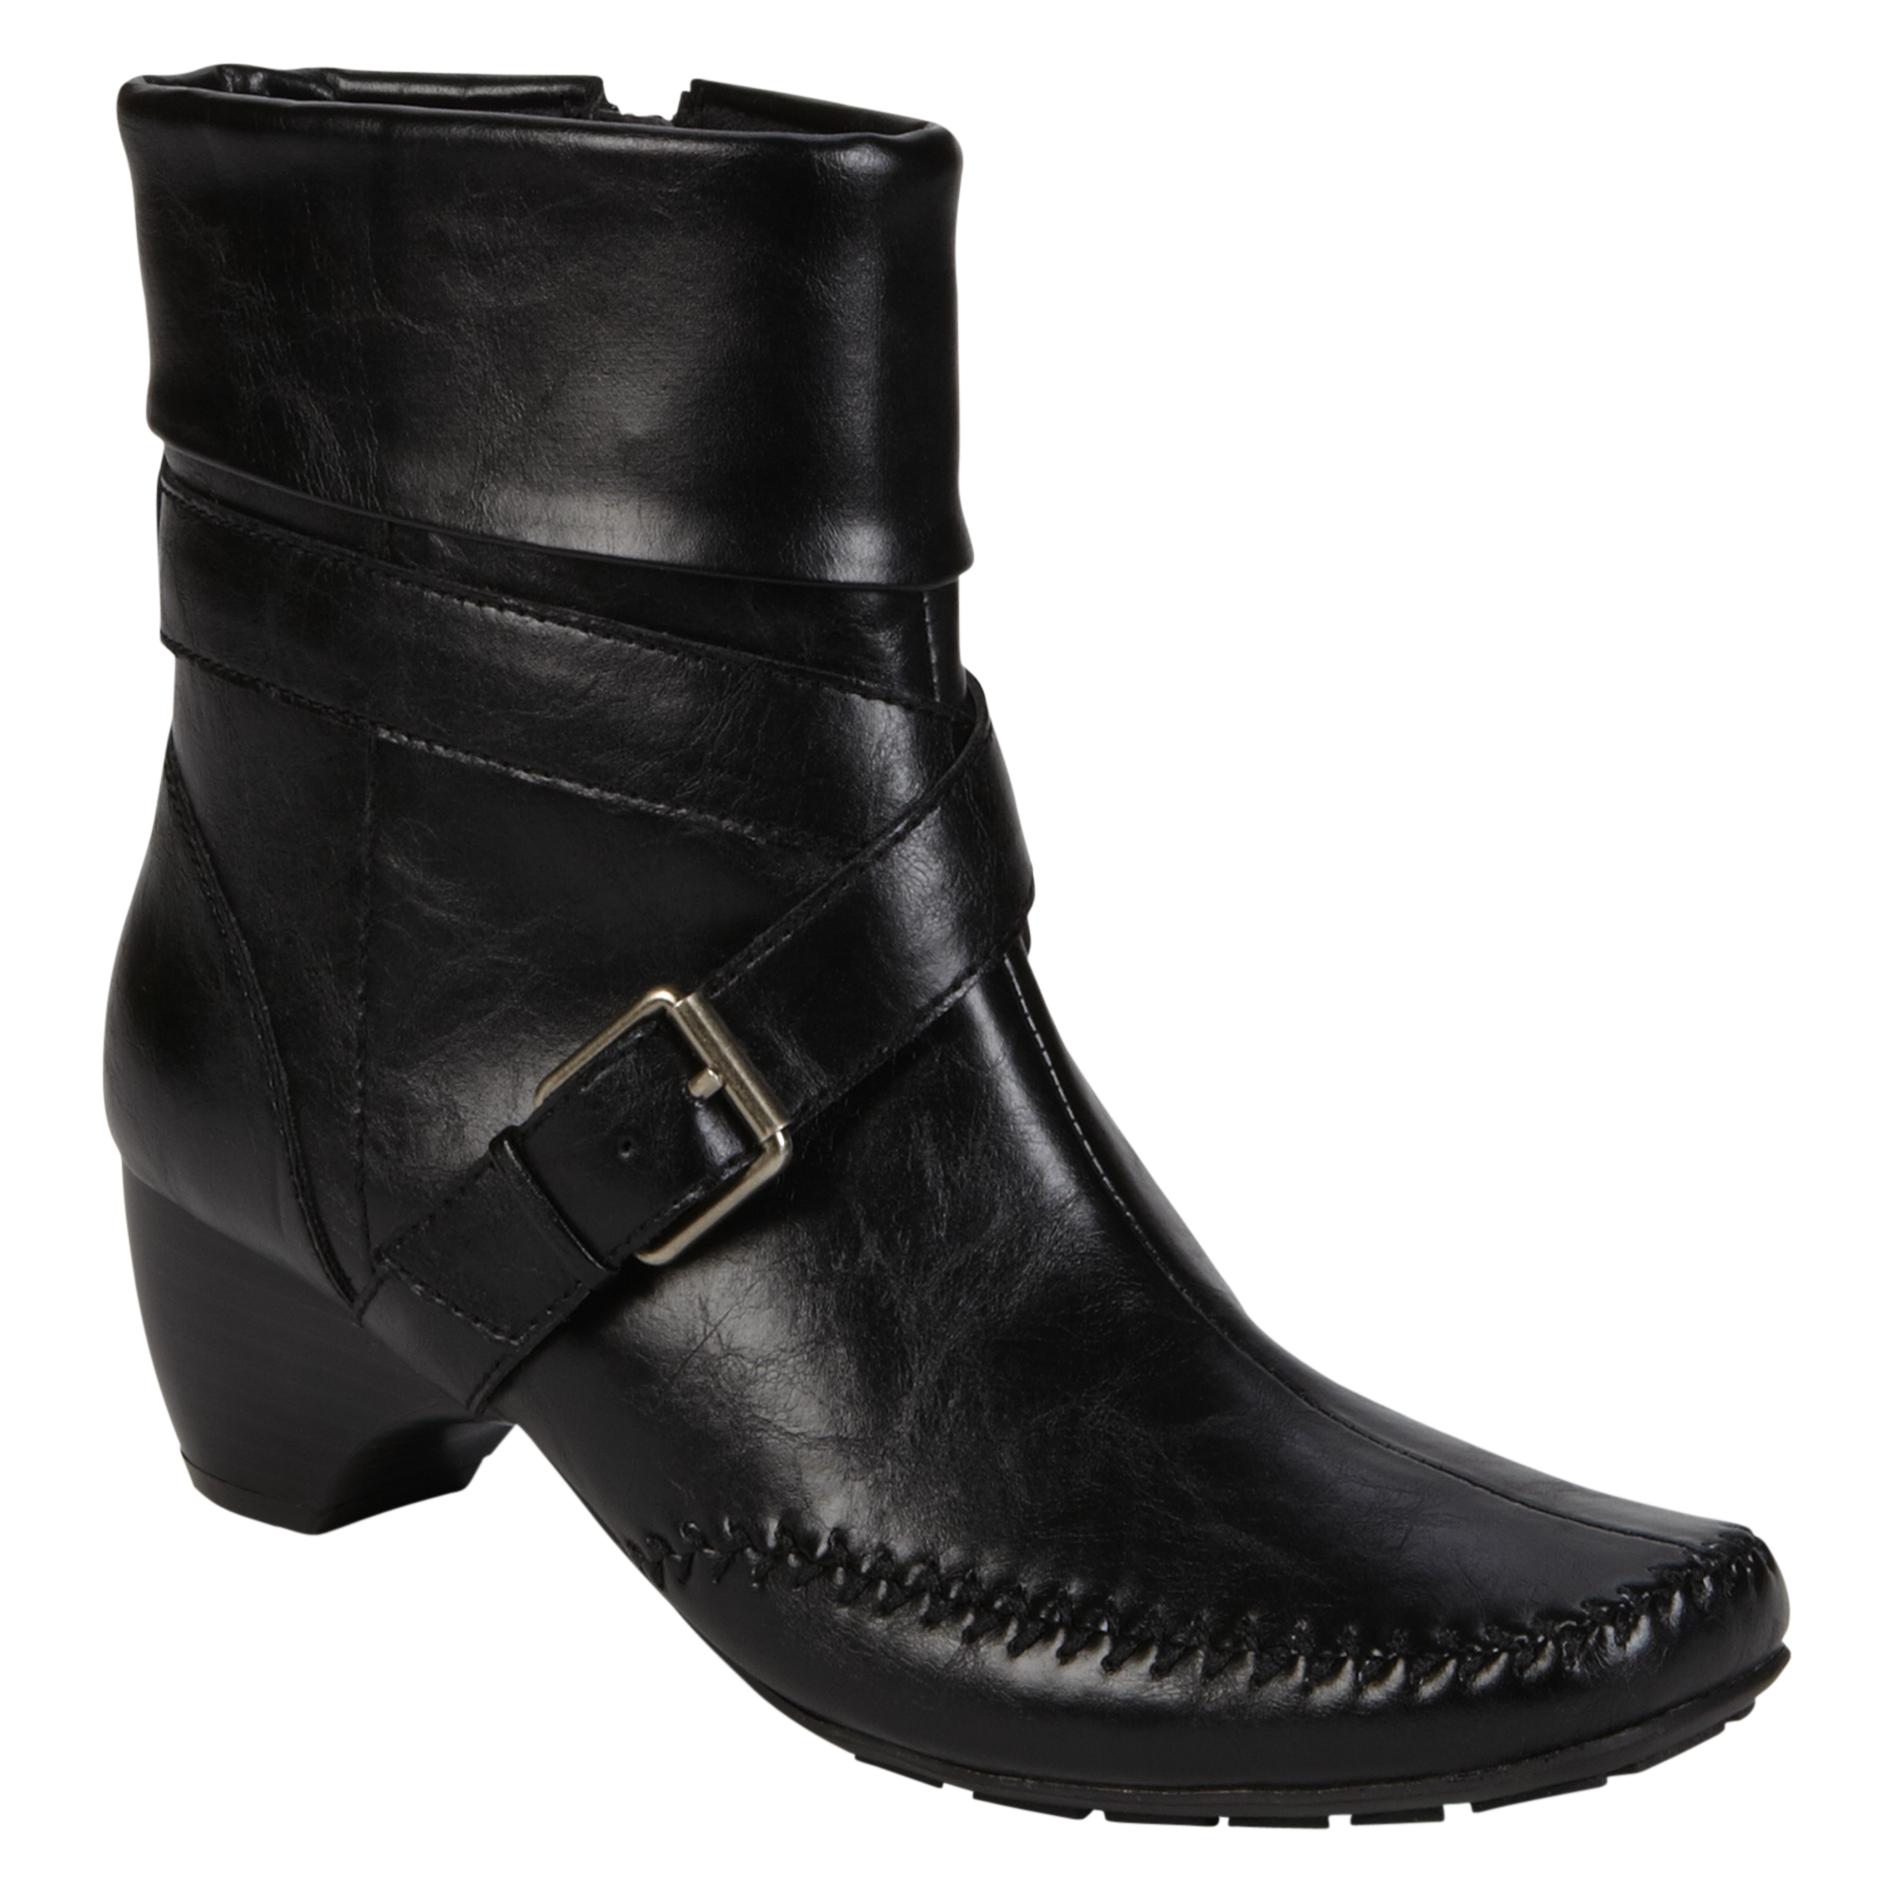 Womens Comfortable Black Boot Laina: Find Comfortable Boots at Sears